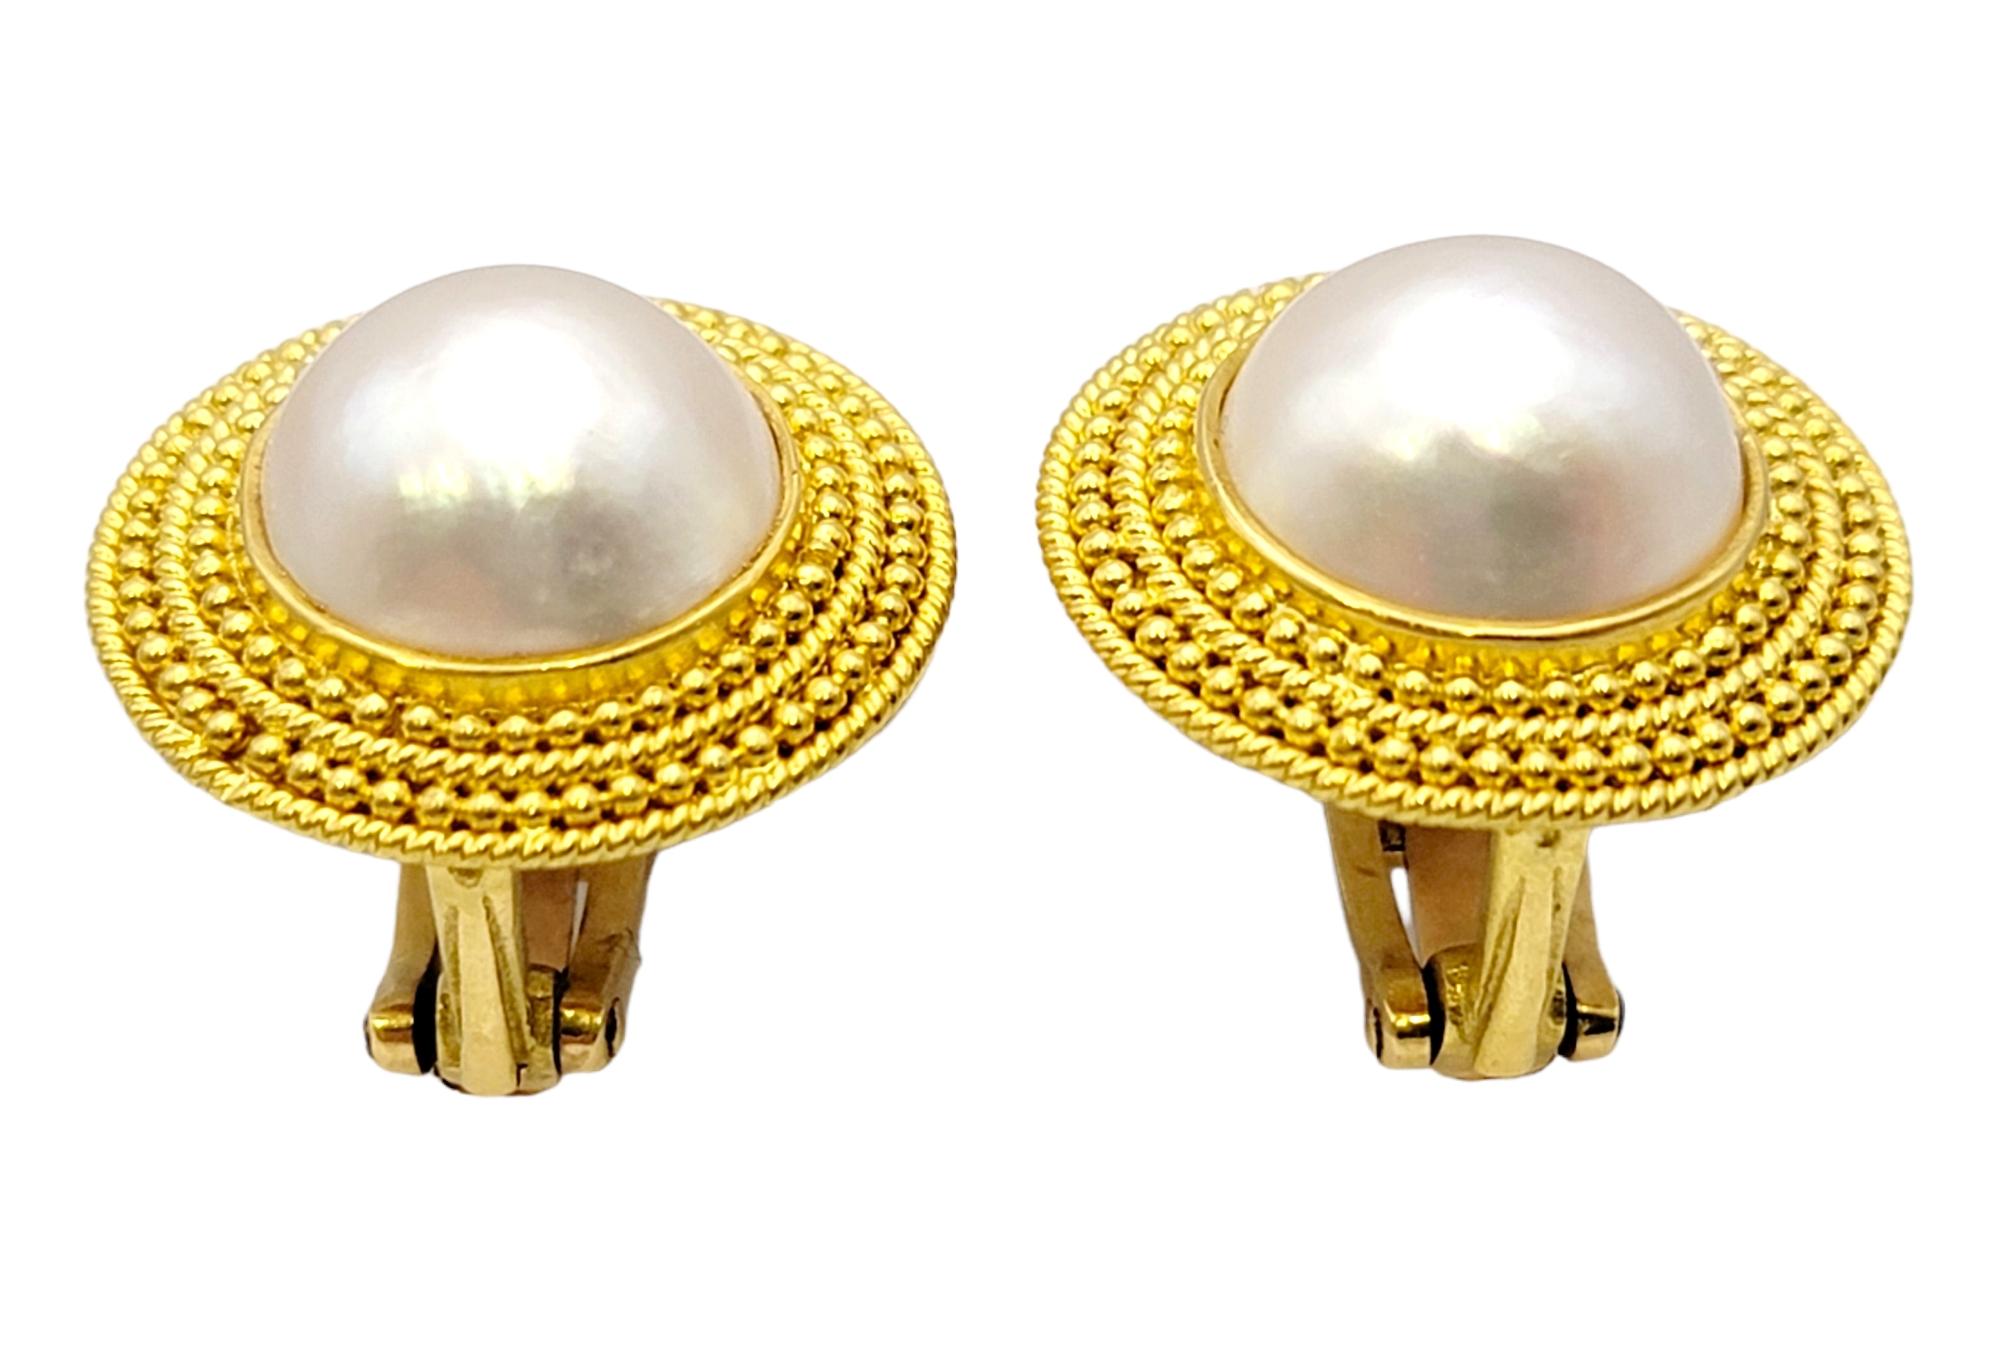 Sophisticated clip-on earrings by Greek jewelry designer, Ilias Lalaounis. These elegant beauties feature gorgeous cultured Mabe pearl centers with slight pink overtones. Textured 18K yellow gold surrounds the pearls, framing the stones beautifully